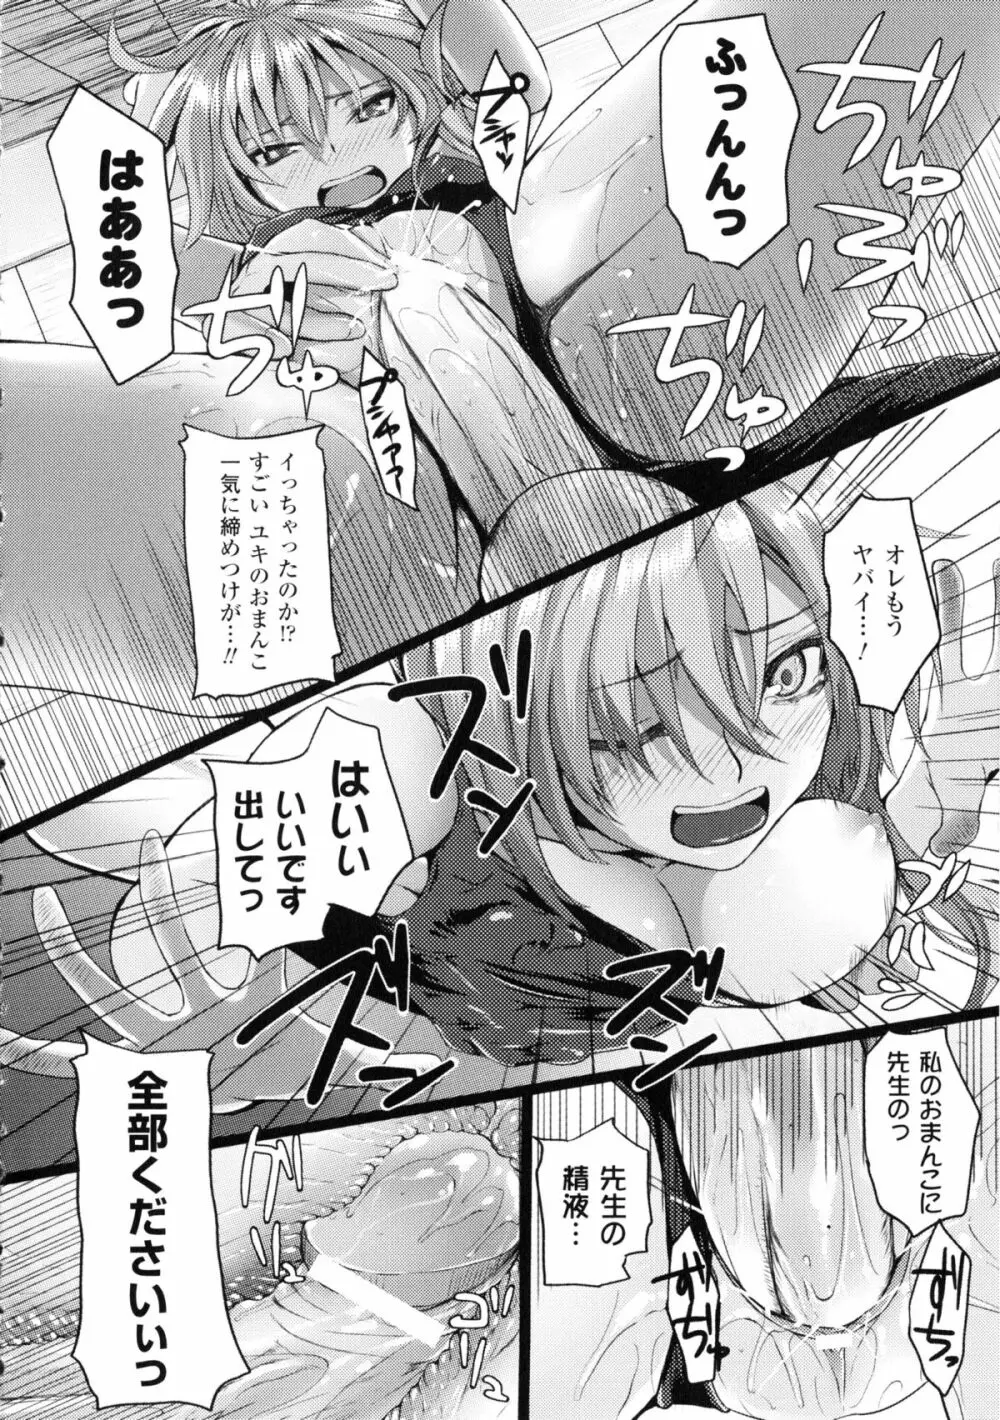 Dive in Me + 描き下ろし4Pリーフレット Page.170